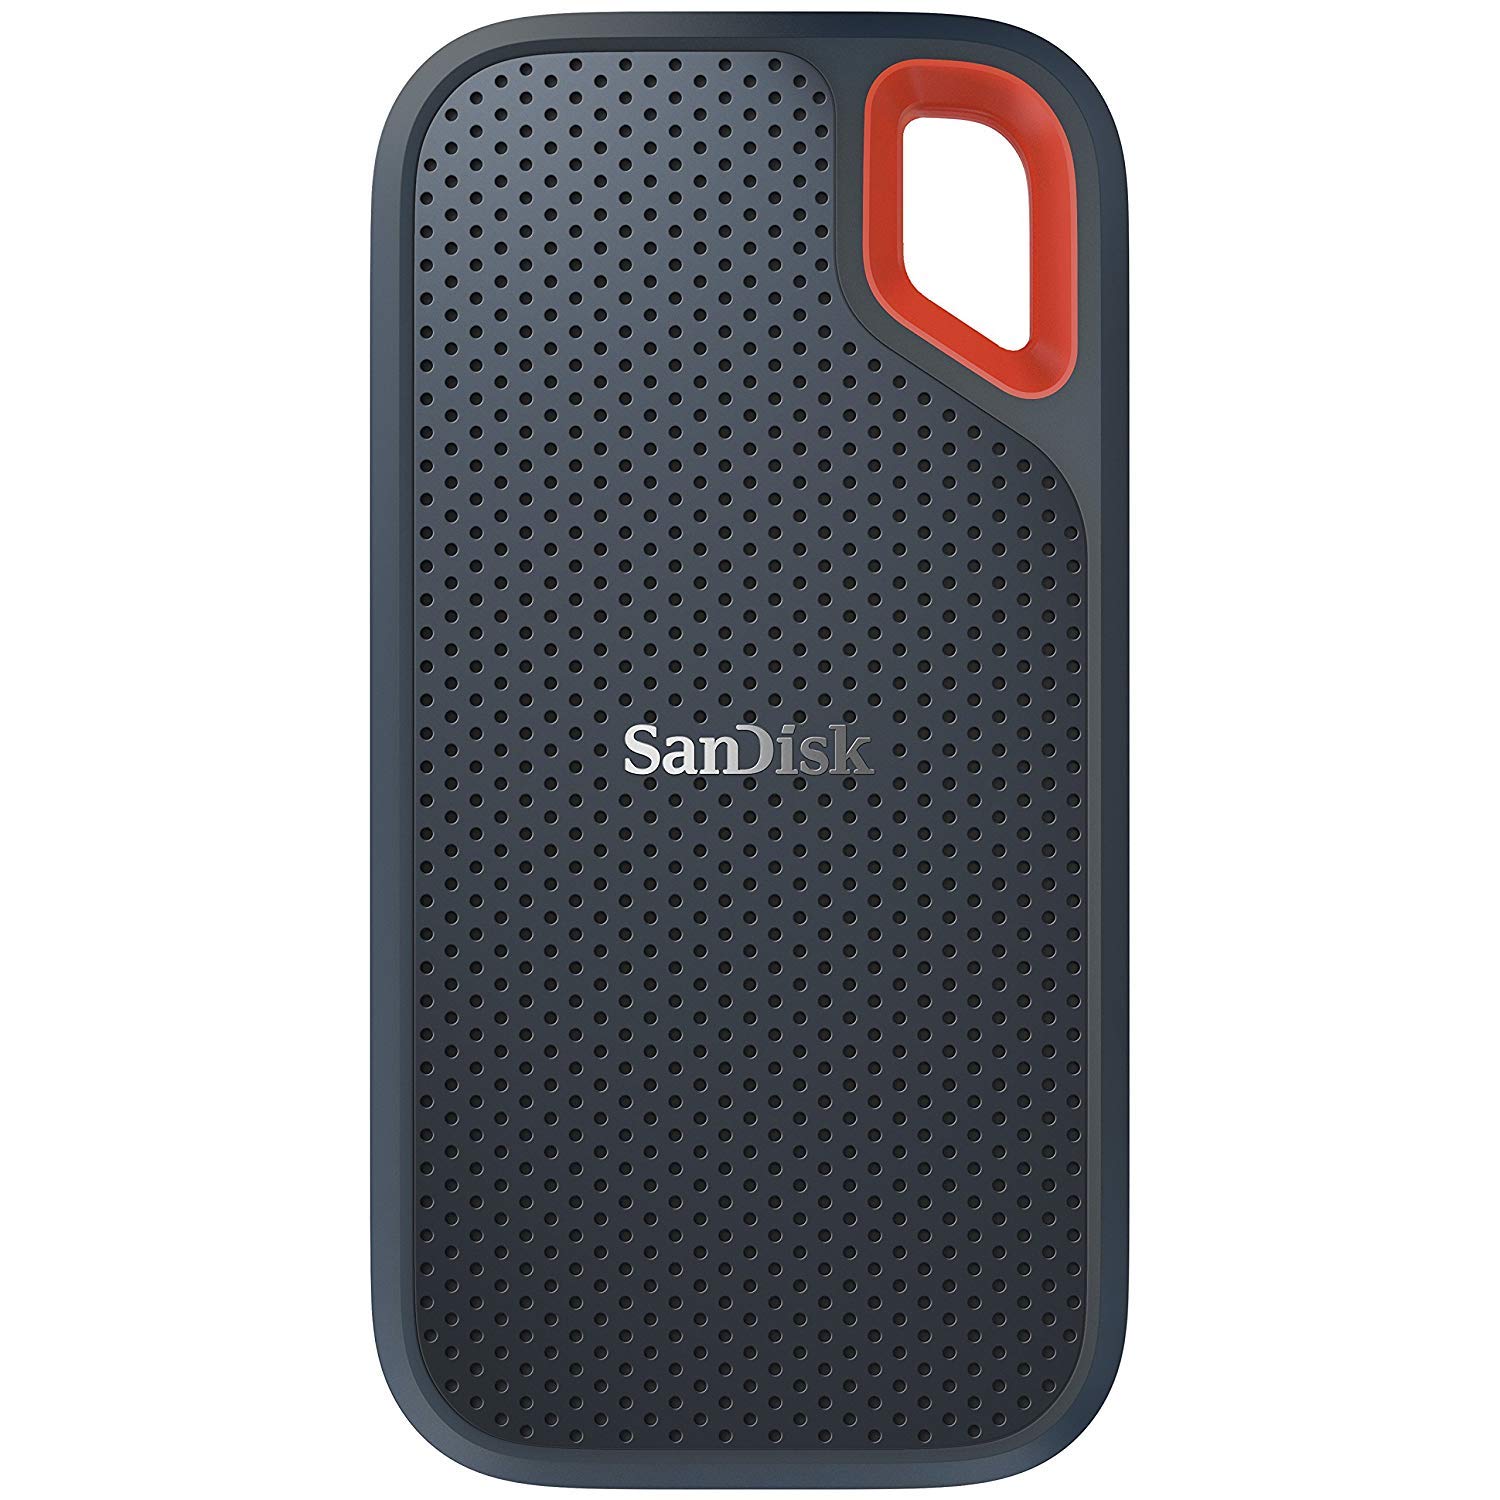 SanDisk 250GB Extreme Portable External SSD - Up to 550MB/s - USB-C, USB 3.1 - SDSSDE60-250G-G25 (Like New, Open Box)